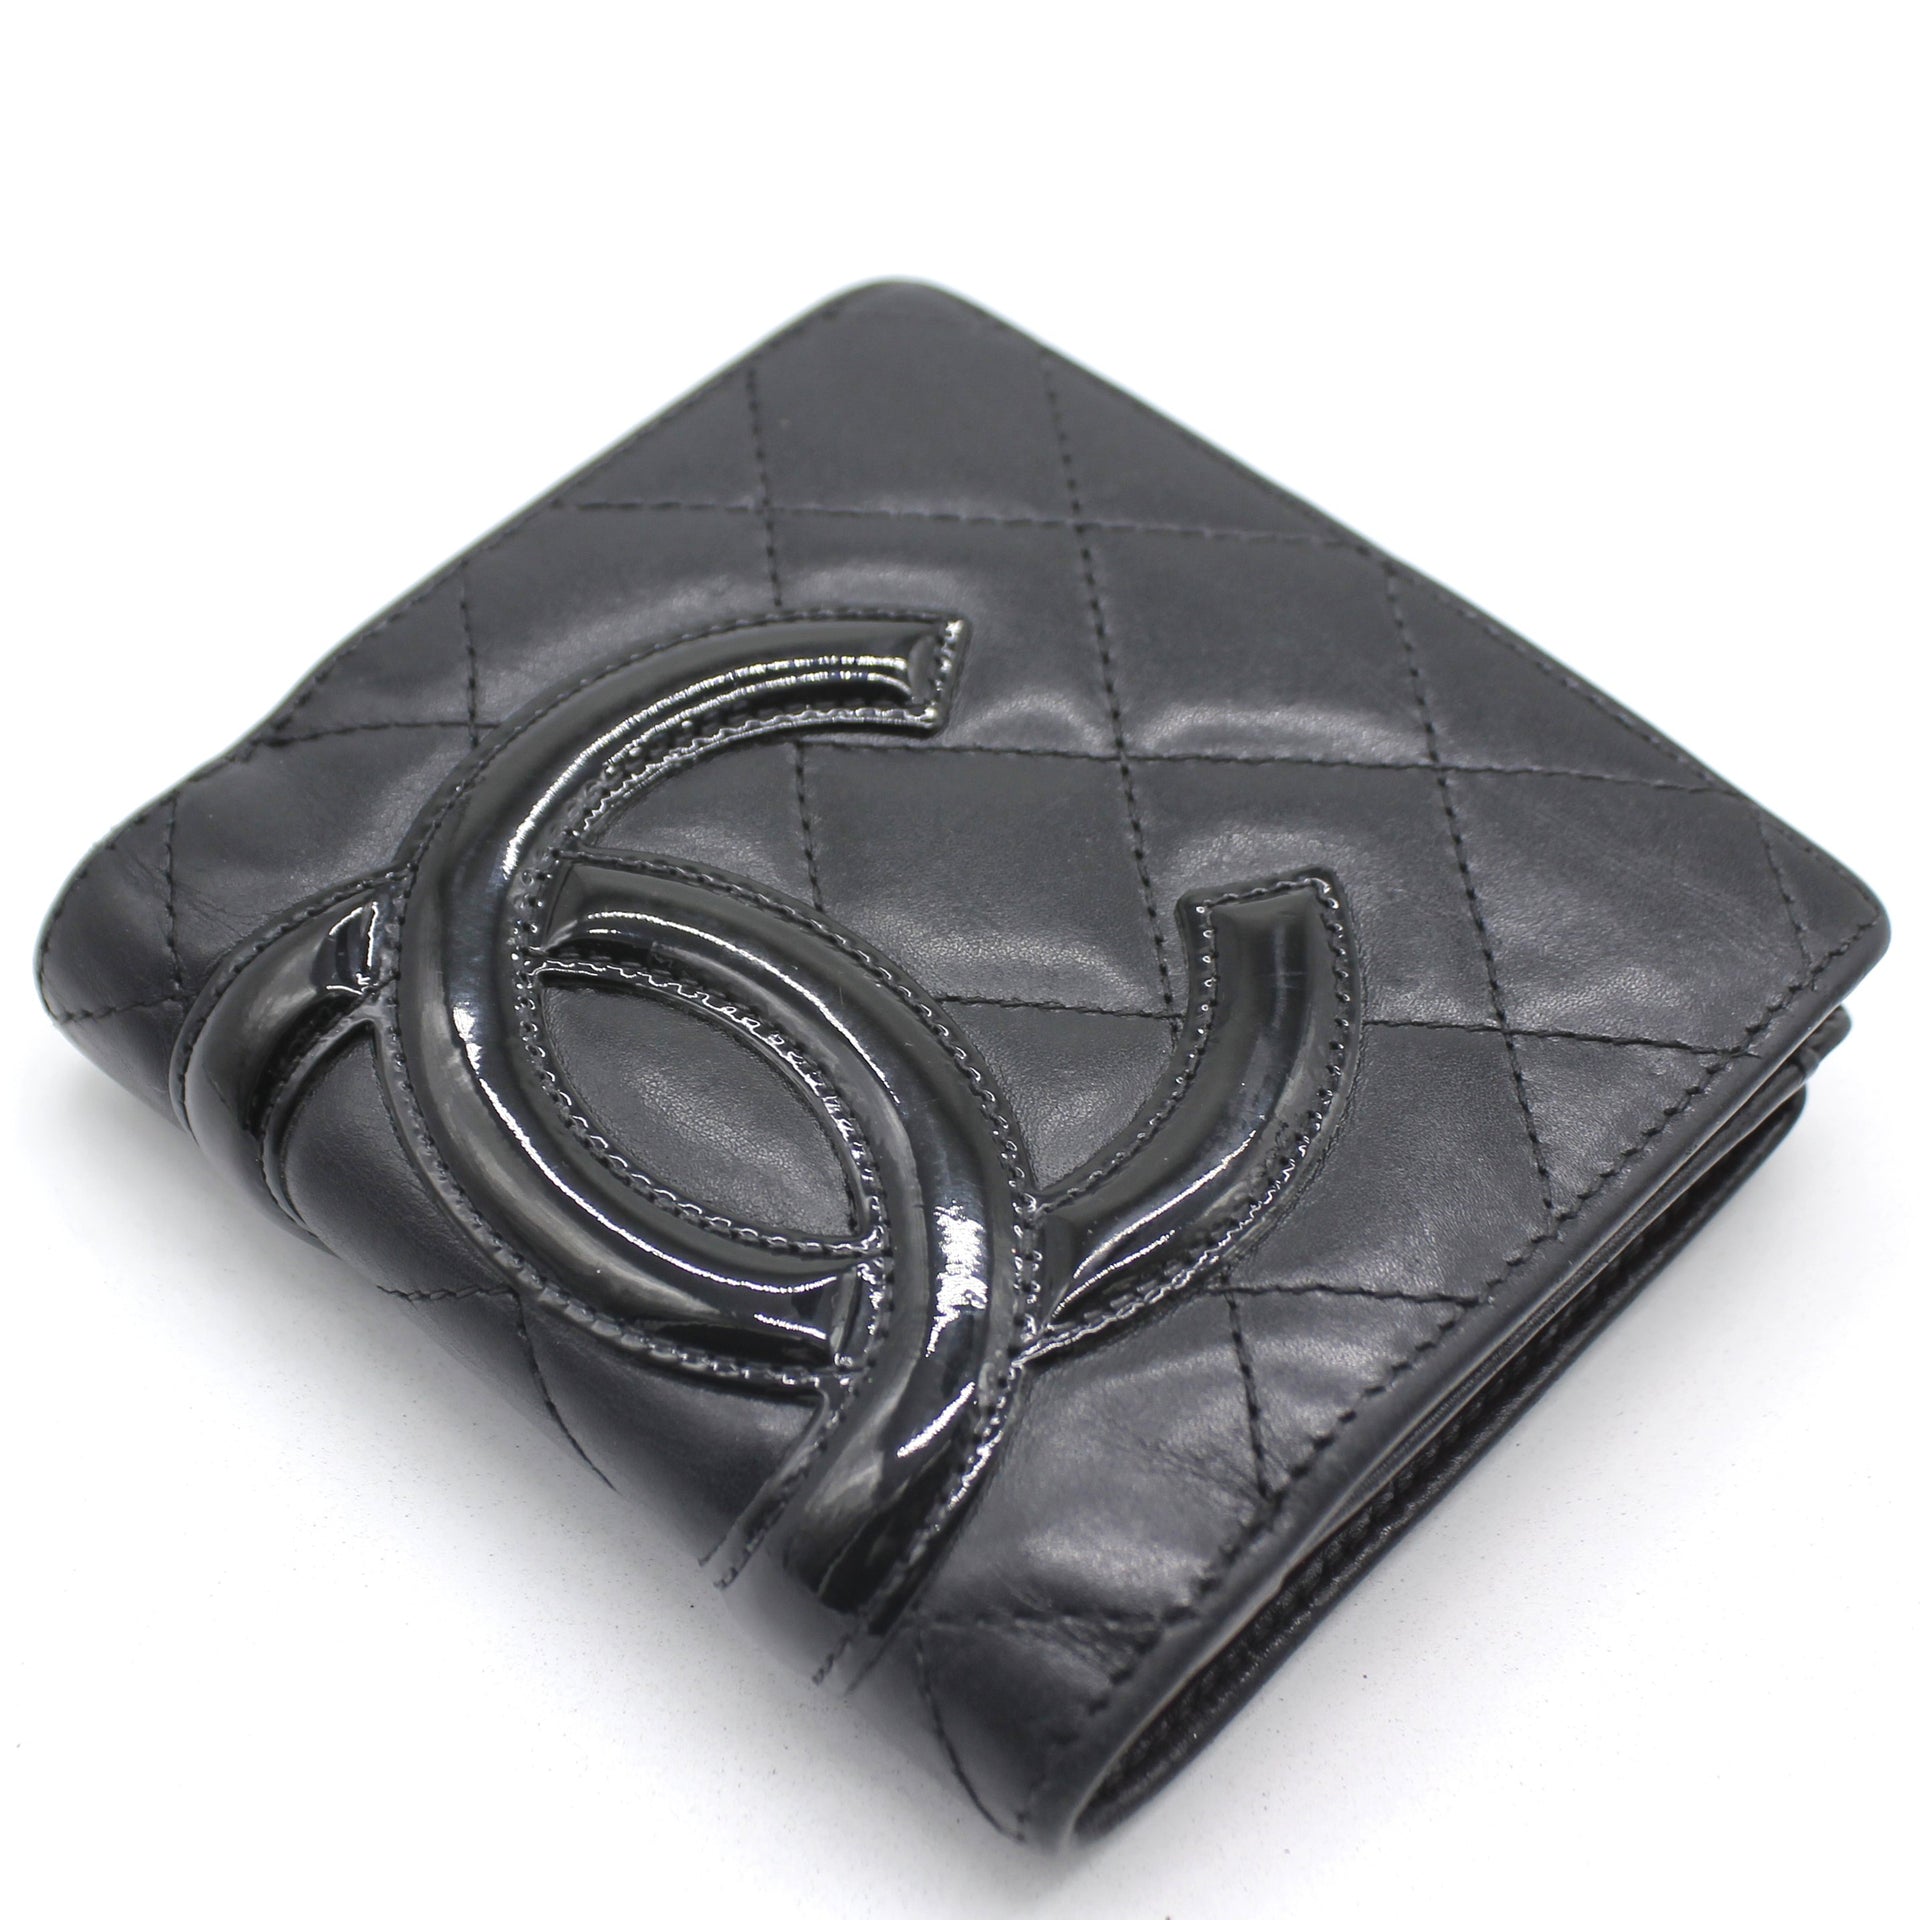 Chanel Cambon Small Compact Wallet